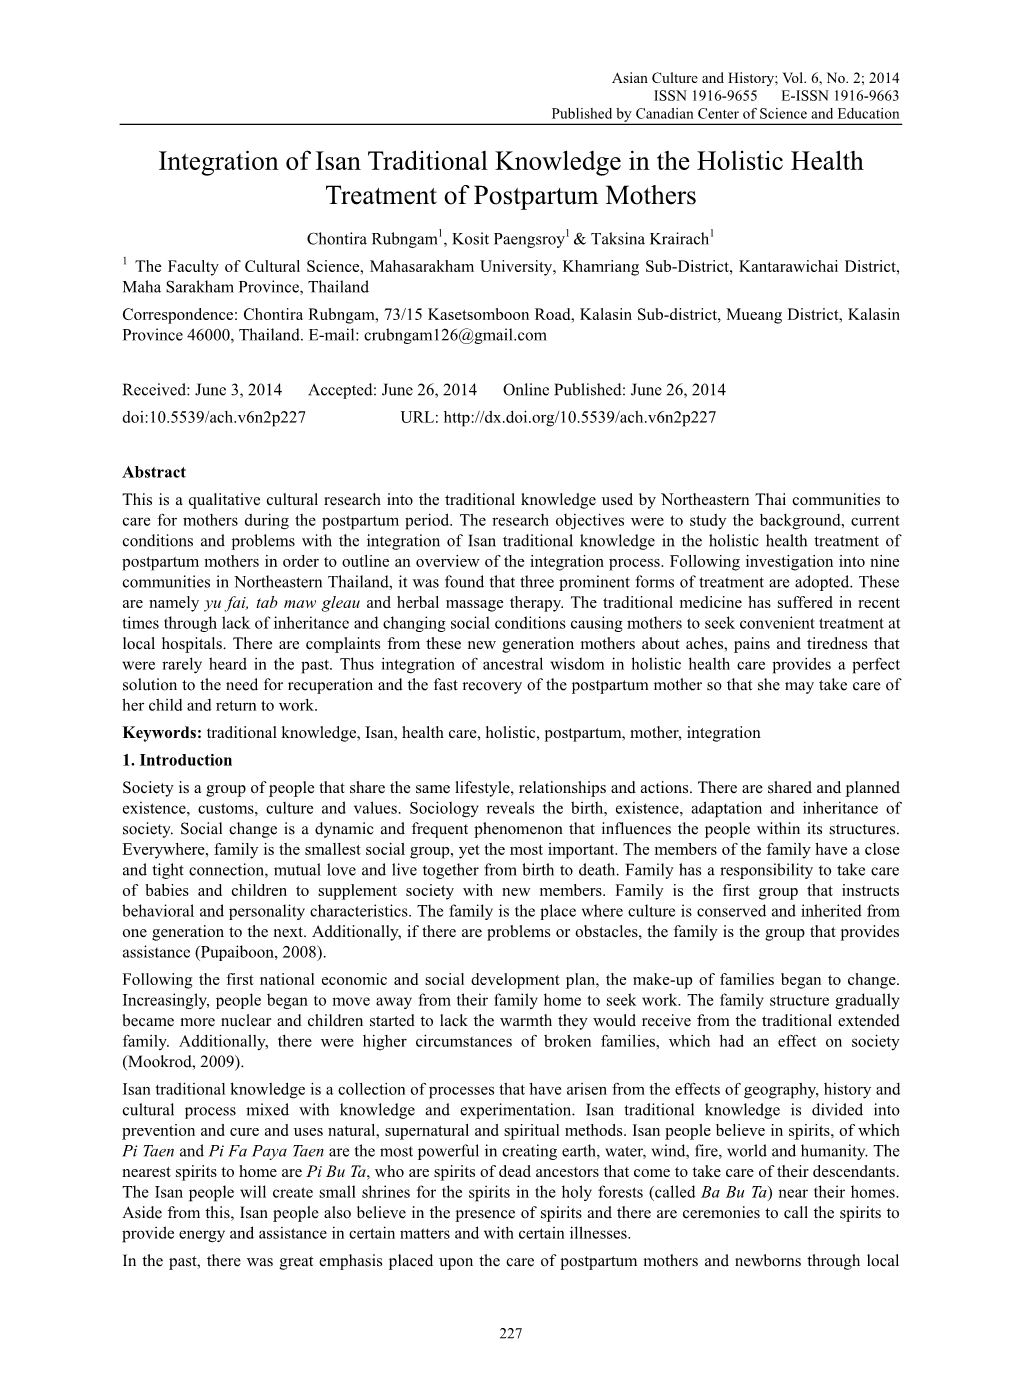 Integration of Isan Traditional Knowledge in the Holistic Health Treatment of Postpartum Mothers